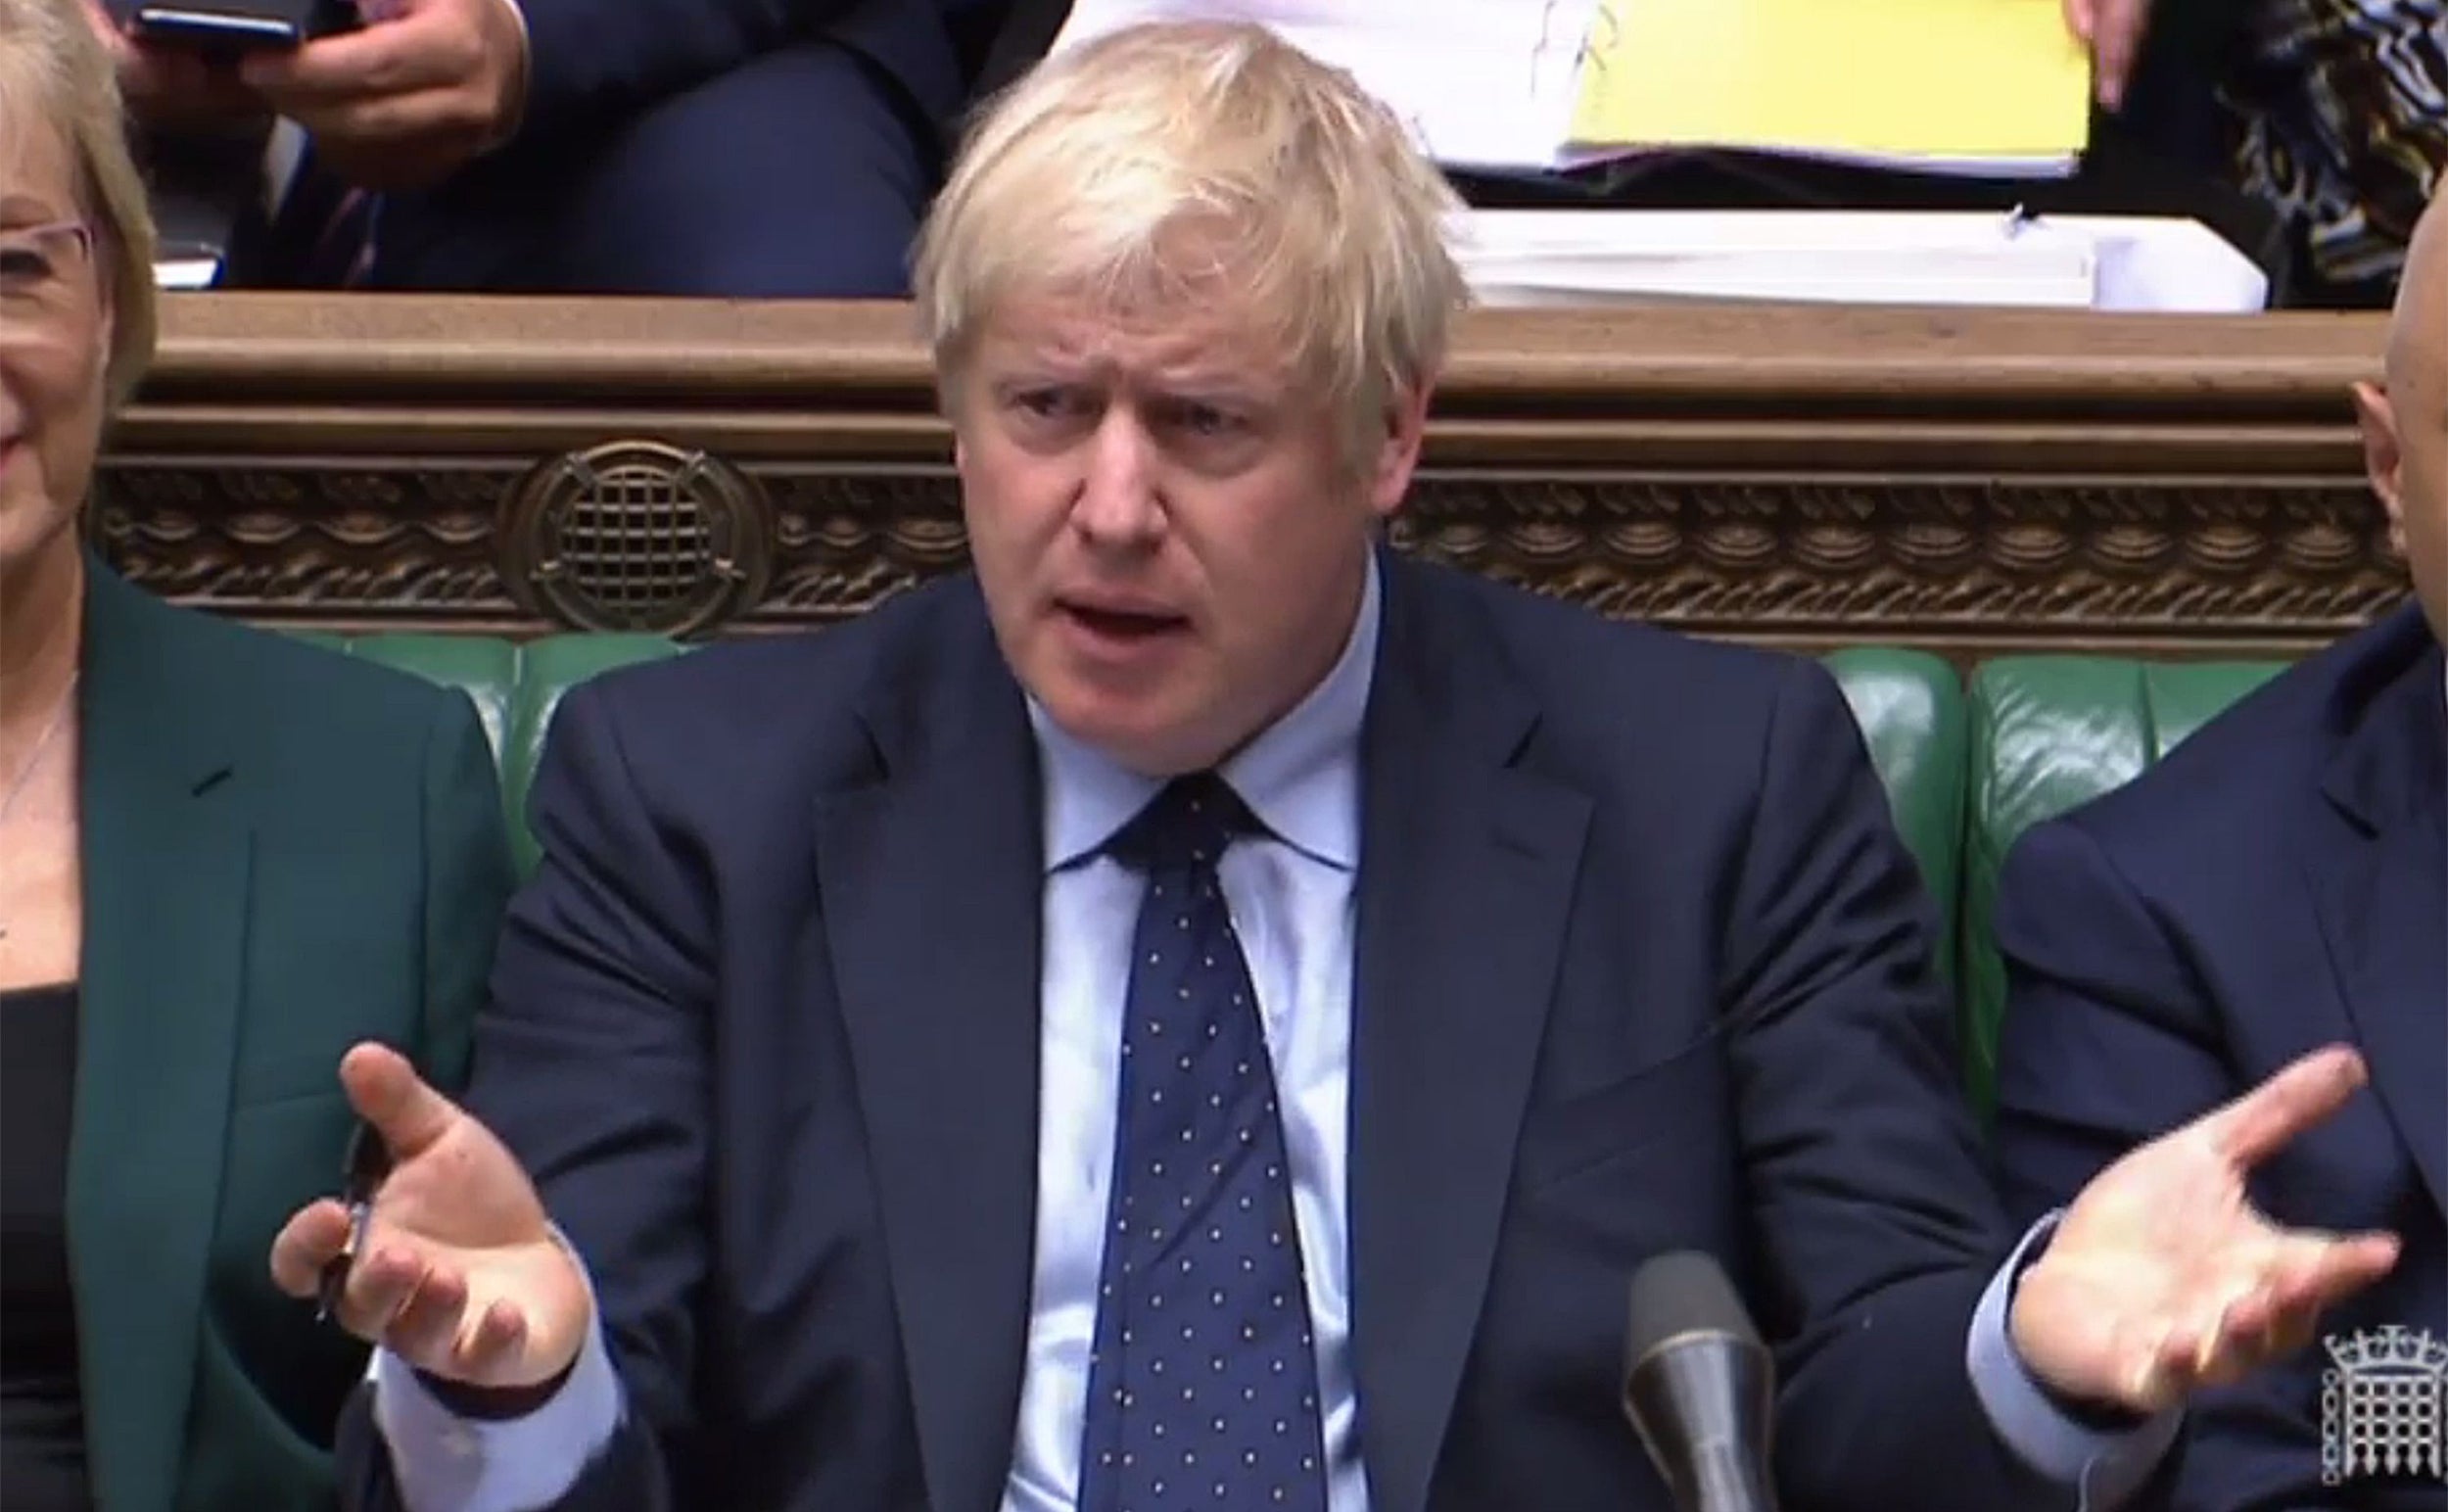 Related: Boris Johnson faces MPs after Supreme Court humiliation